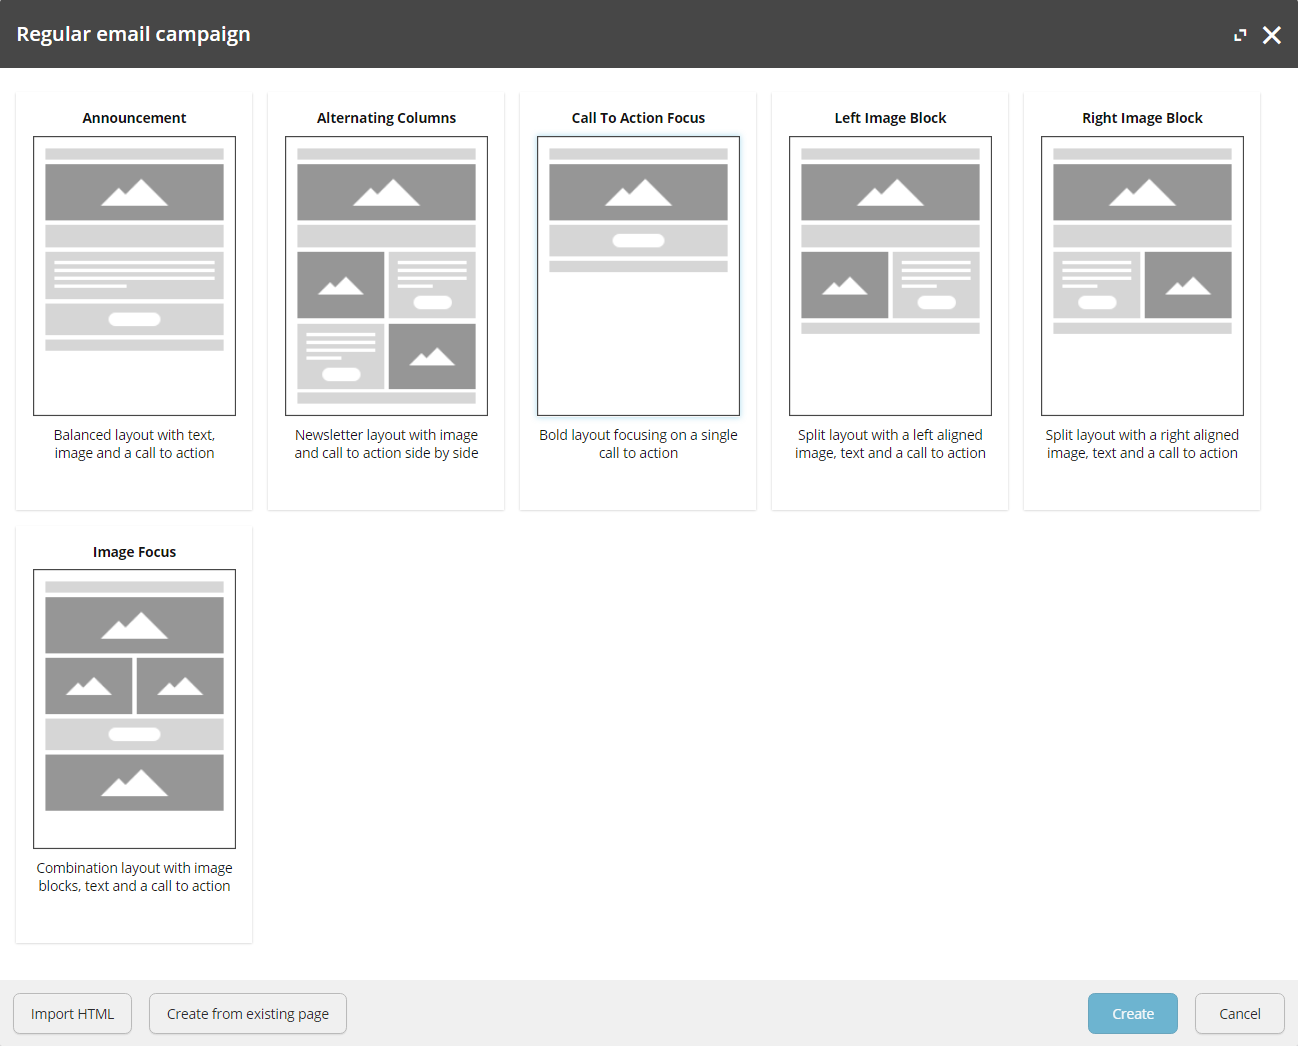 Regular email campaign templates.